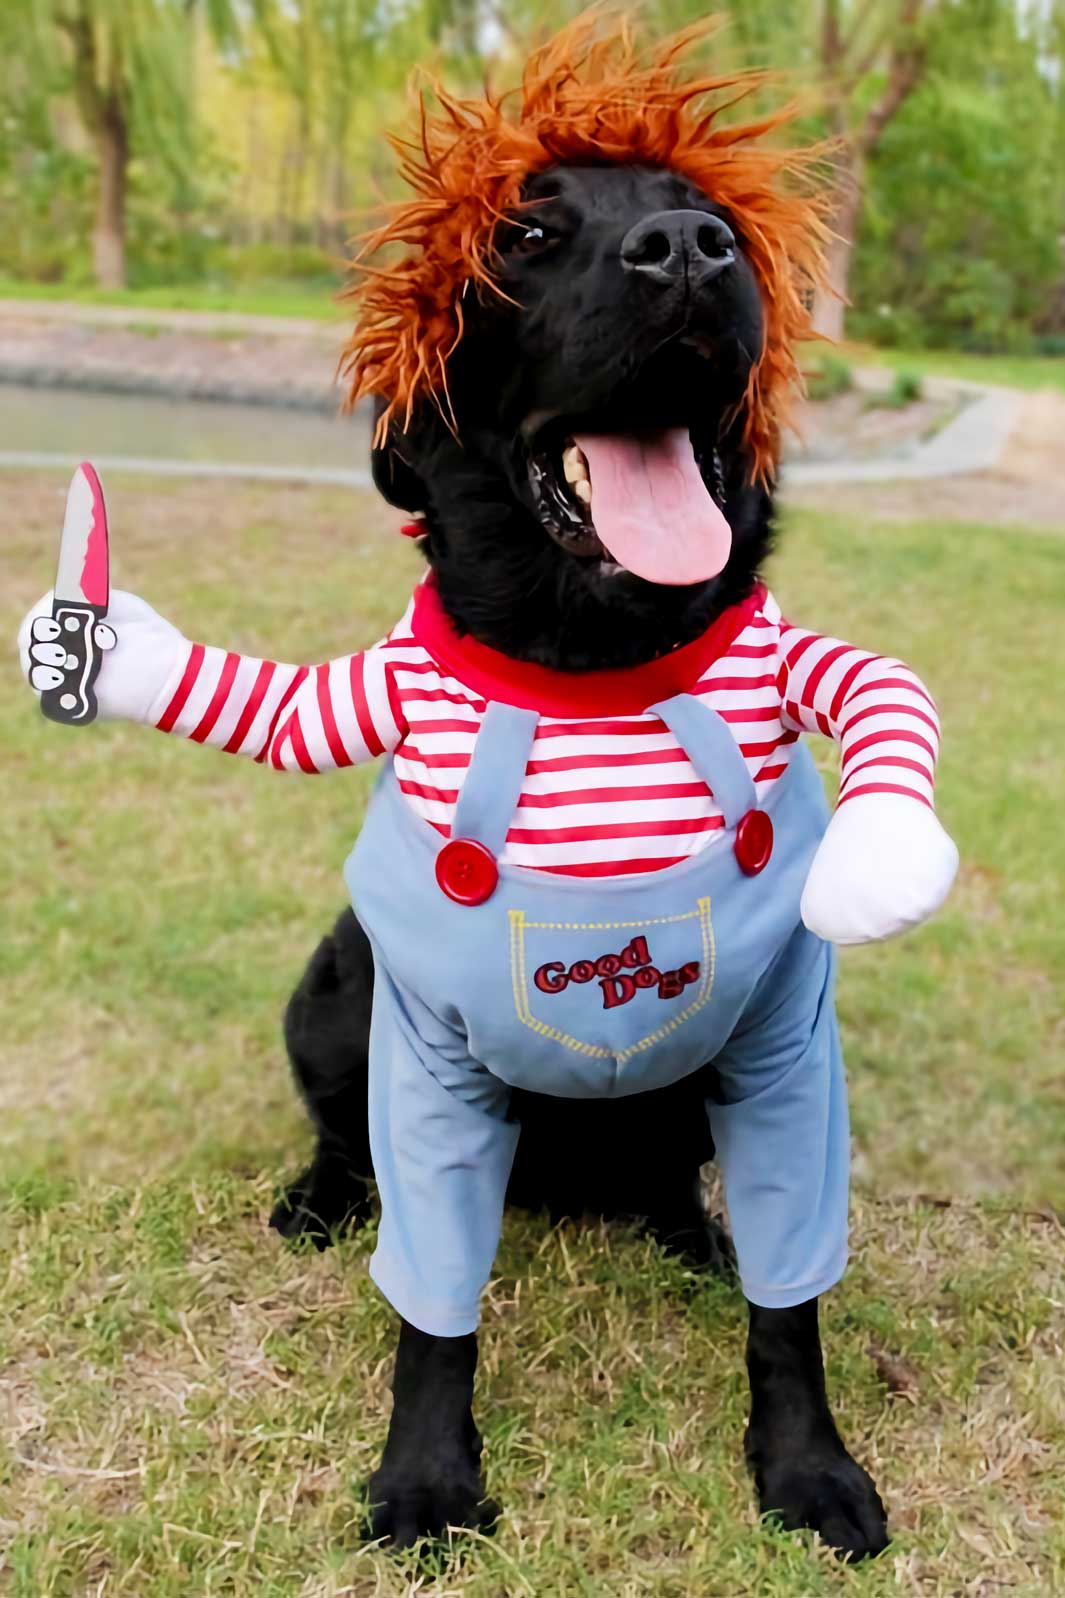 The Infamous Deadly Dog Costume – they made me wear it